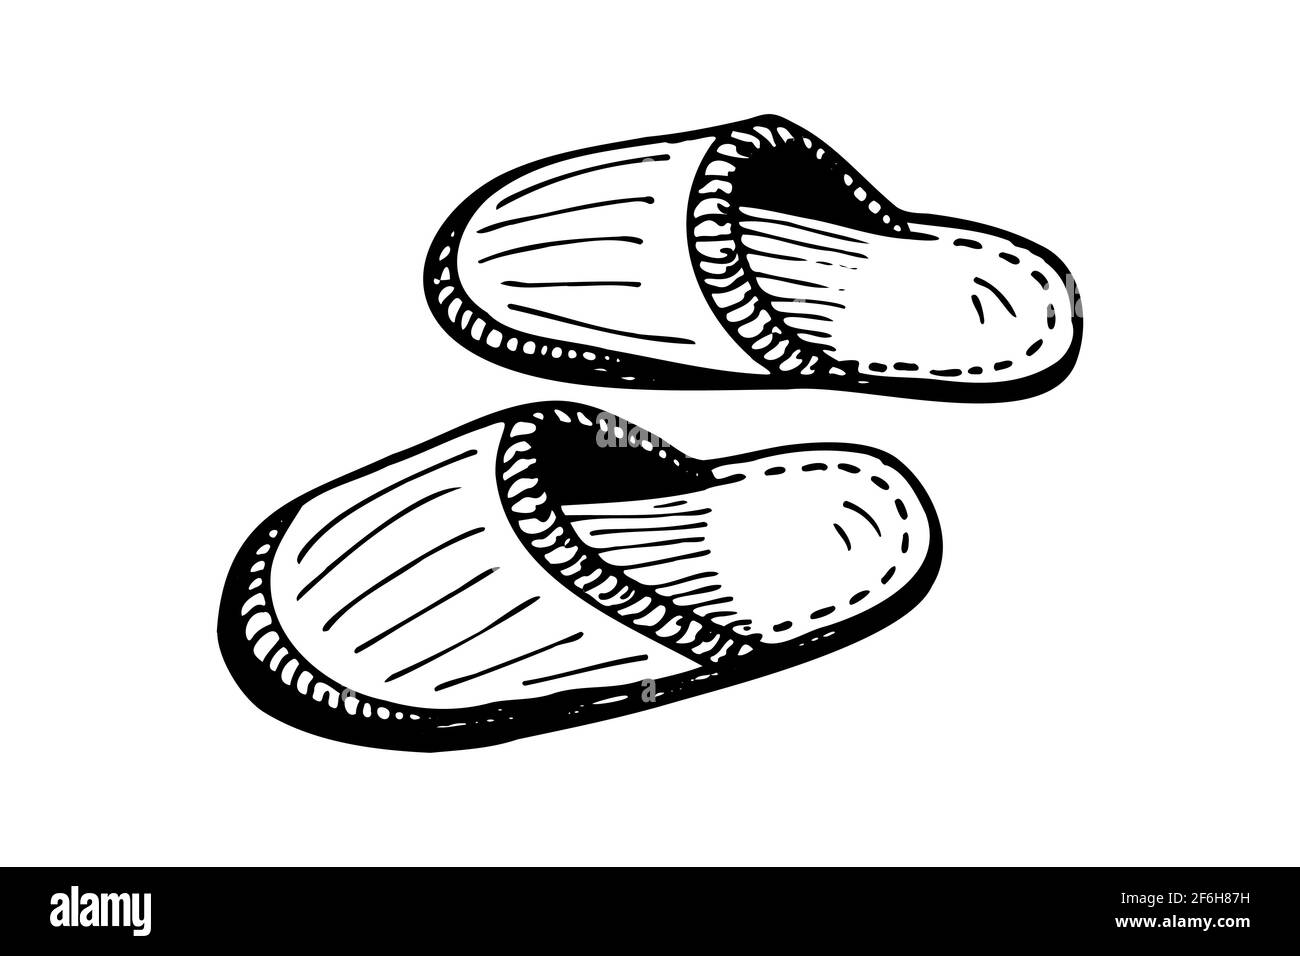 Sleeping slipper couple hand drawn sketch. Home comfortable shoes pair black and white doodle. Slippers vector isolated eps illustration Stock Vector